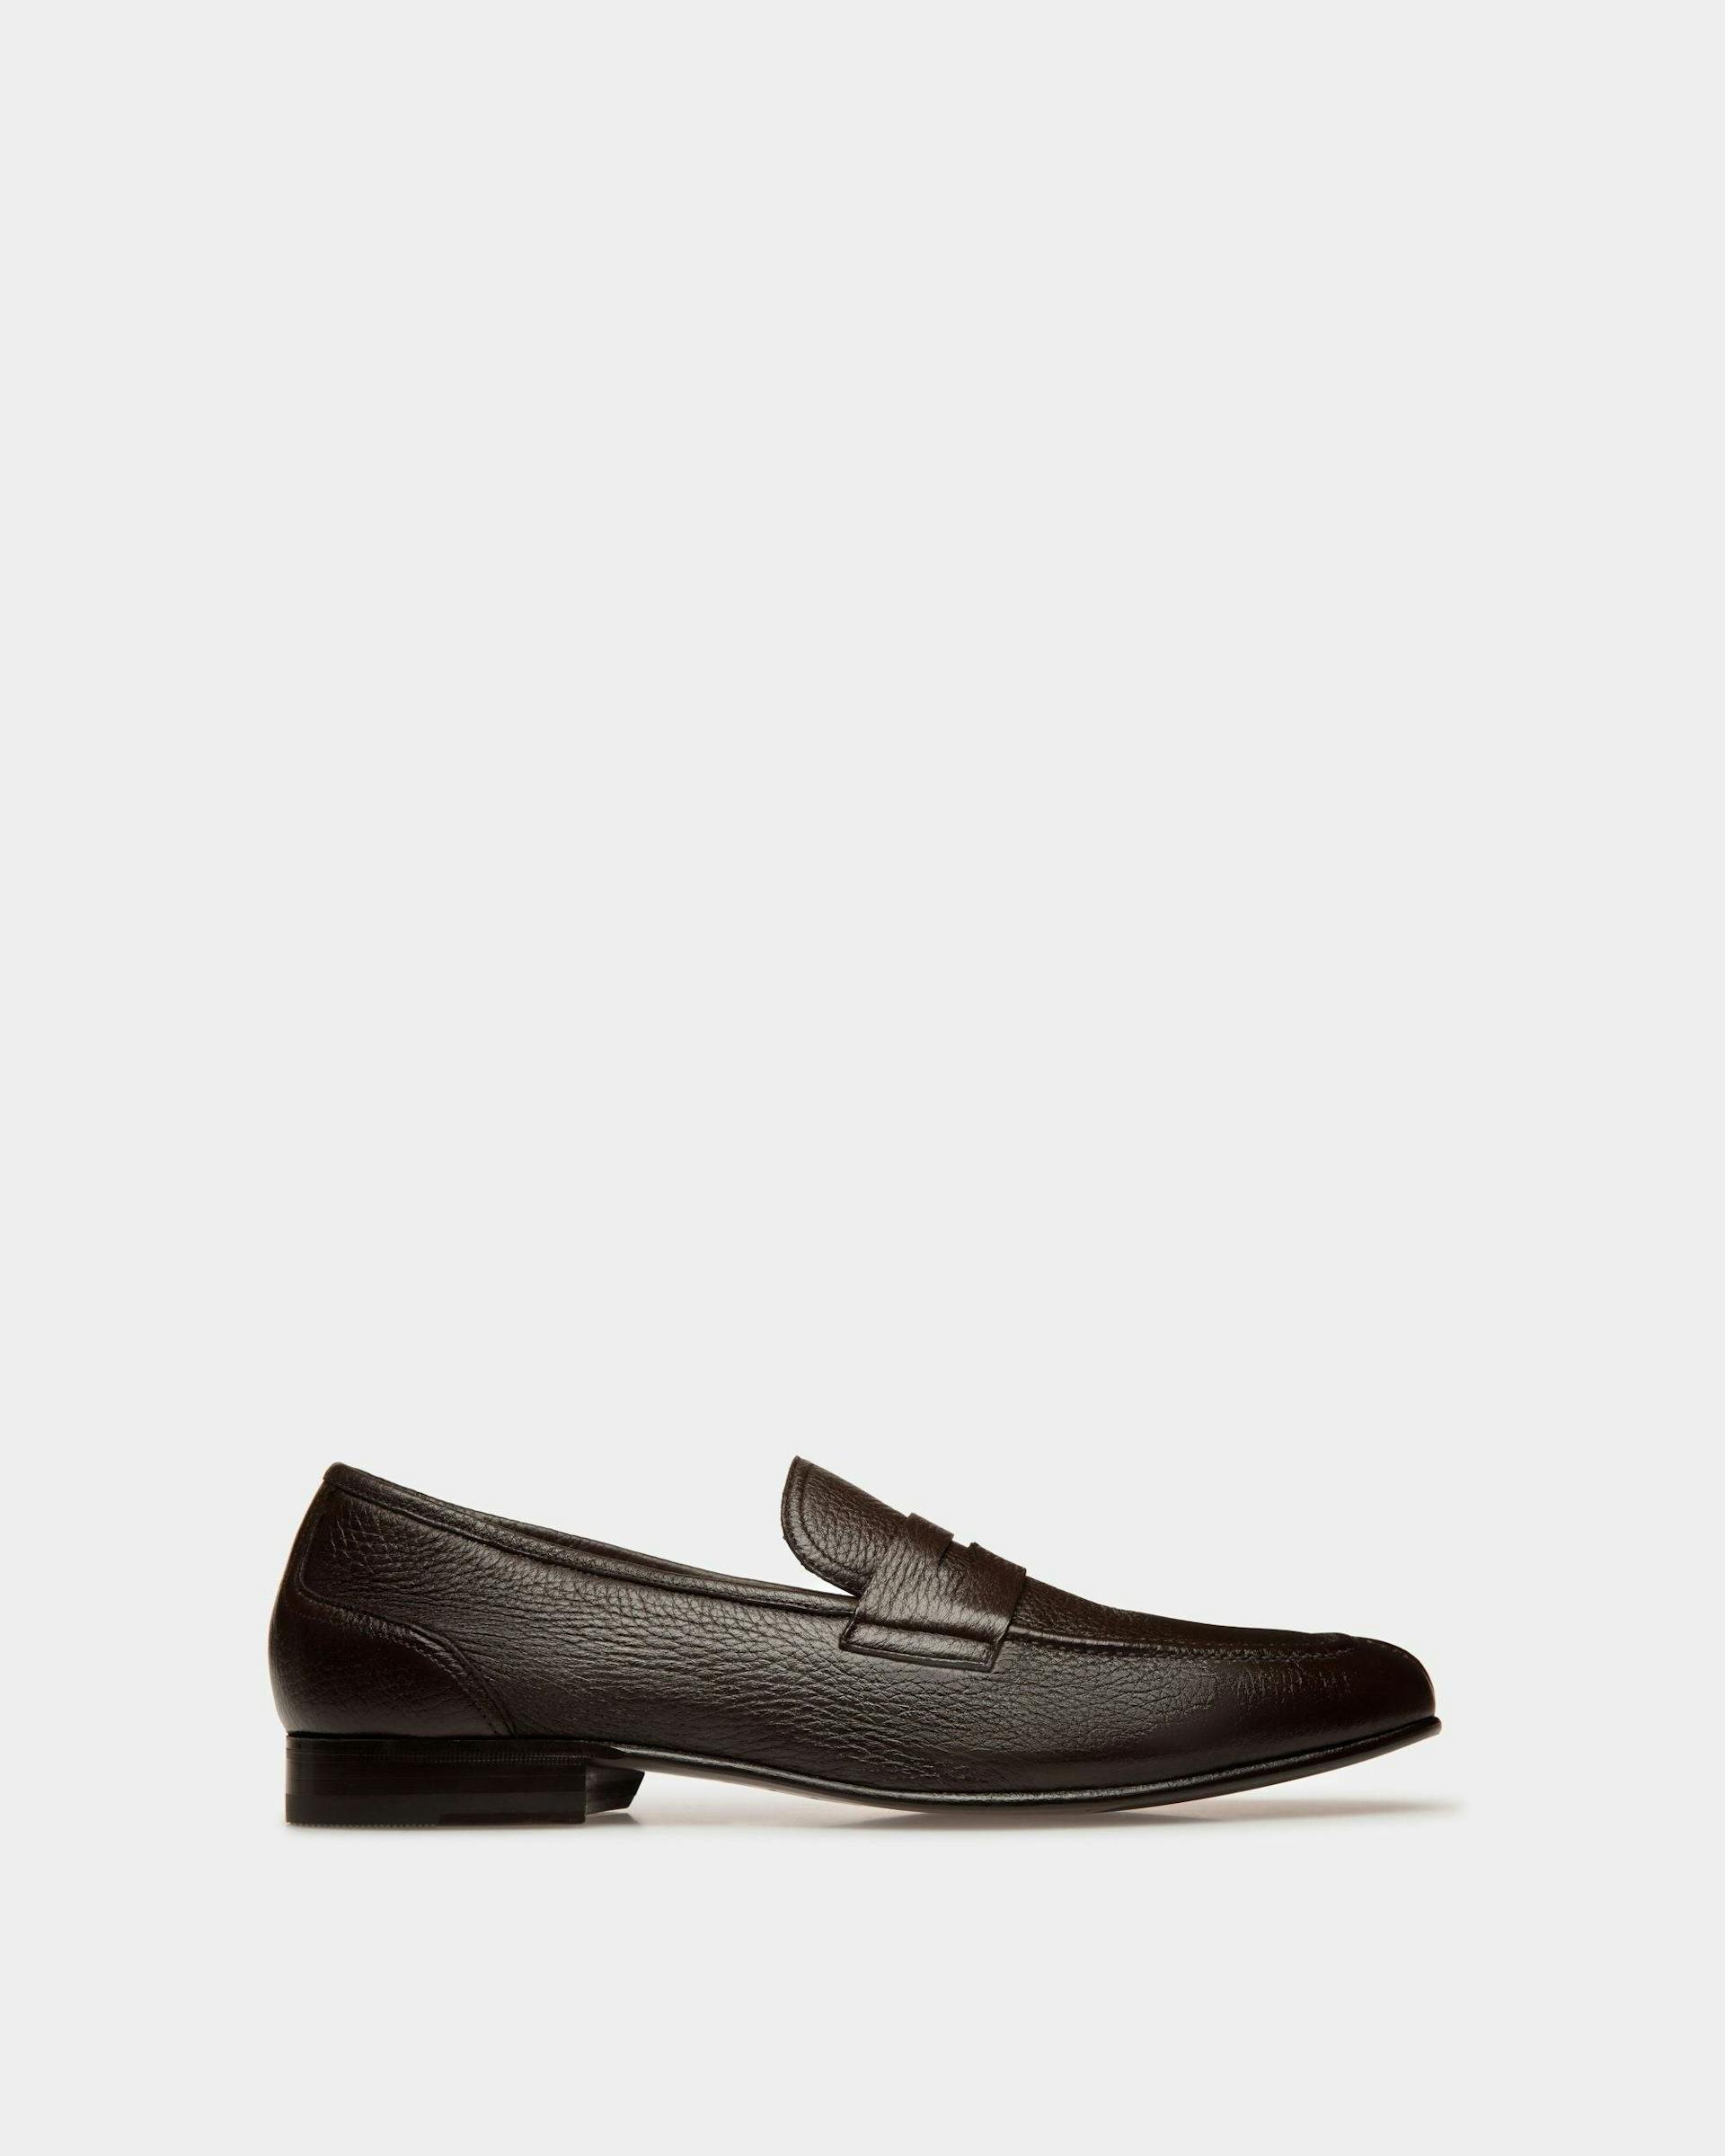 Saix | Men's Loafers | Brown Leather | Bally